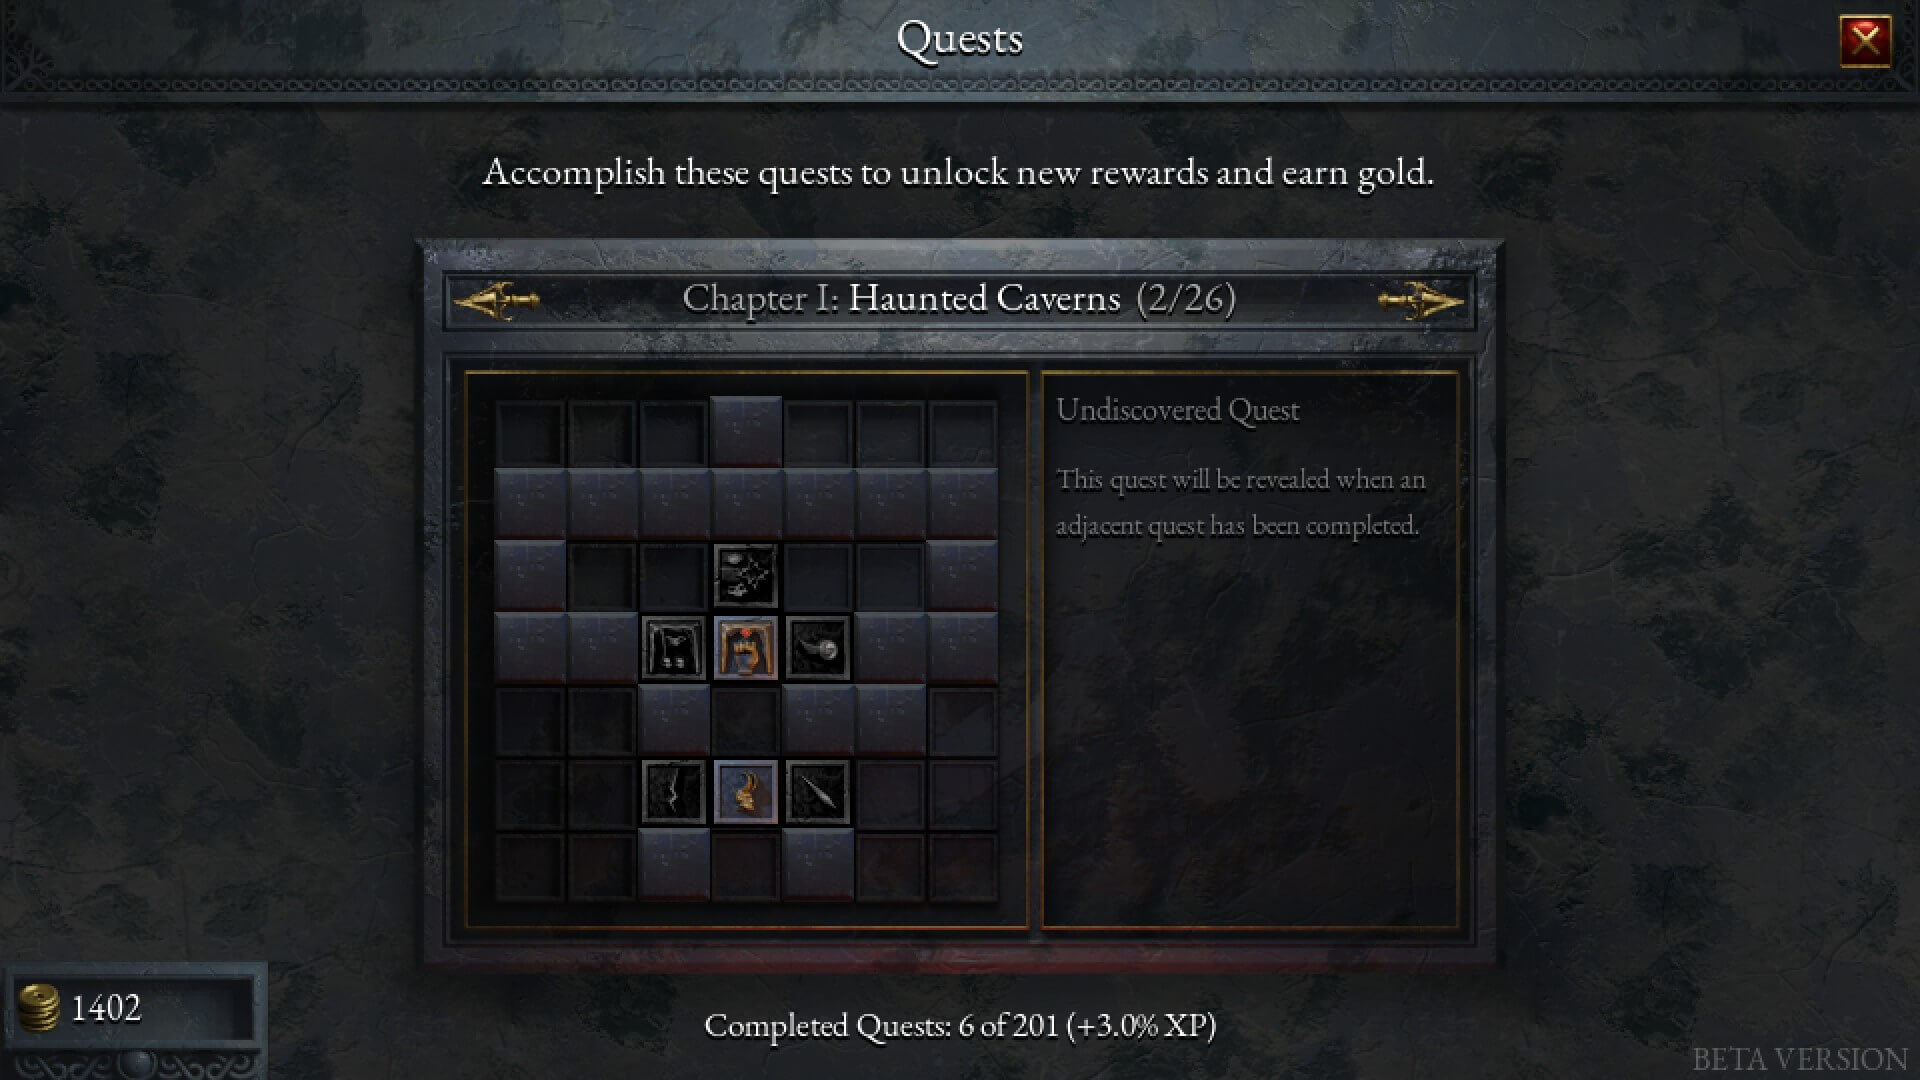 The quest tablet for one of the halls is shown as stone-like squares across it. Each square that stands out from the background is a different quest.